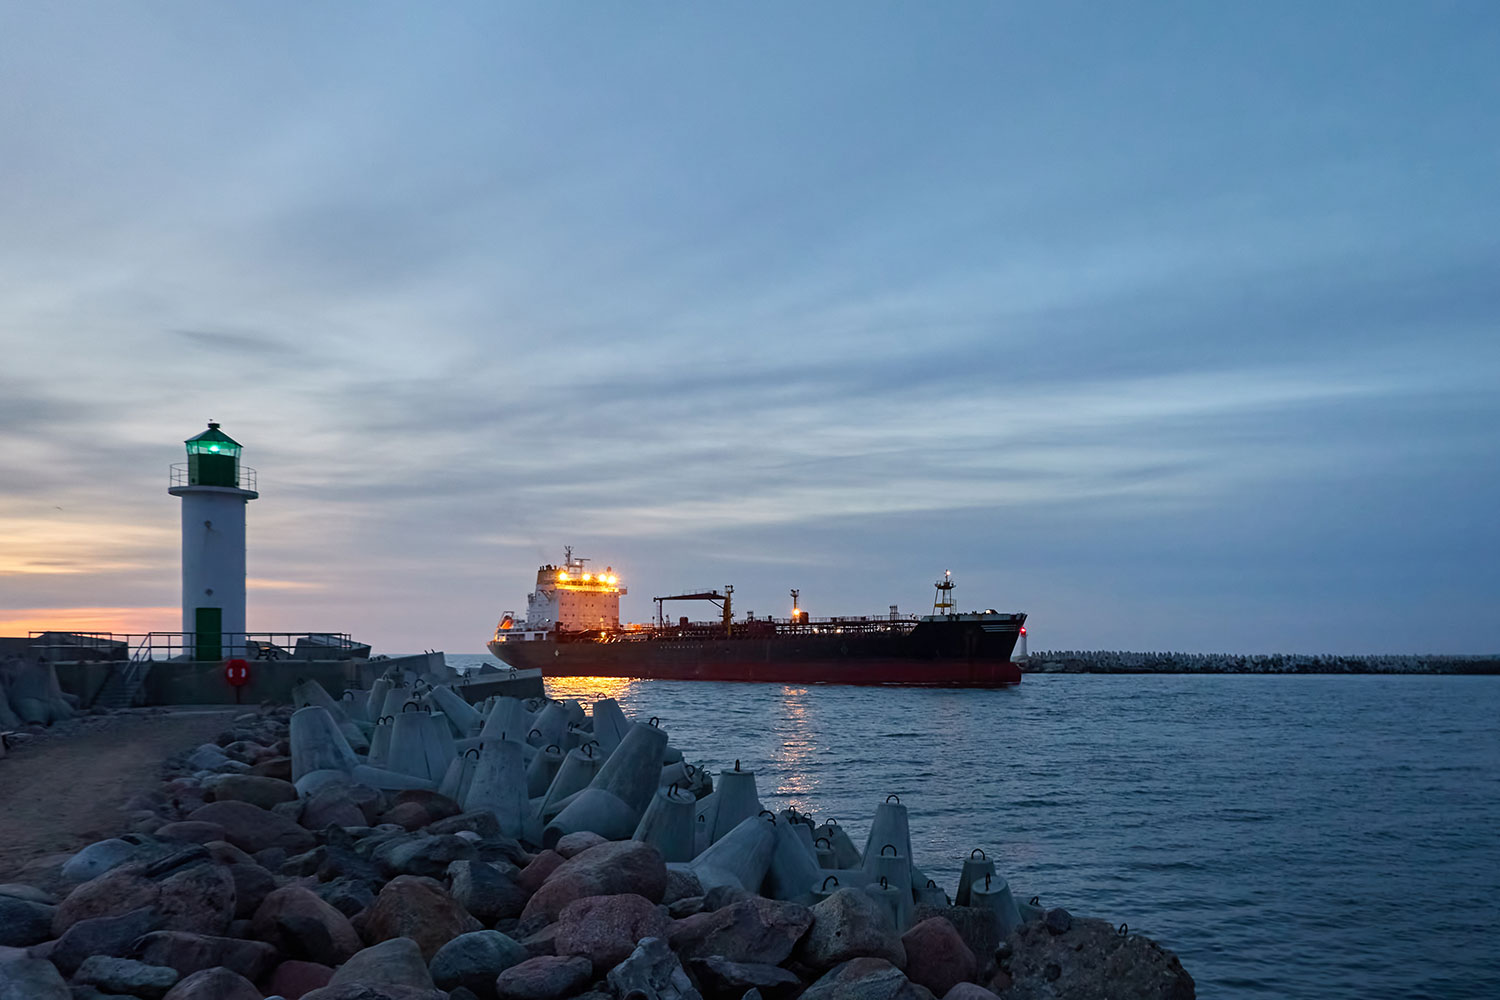 Large cargo ship arriving at the cargo port at sunset. Breakwater, promenade to the lighthouse. Seascape in Ventspils, Latvia. | Source: AdobeStock by Aastels.